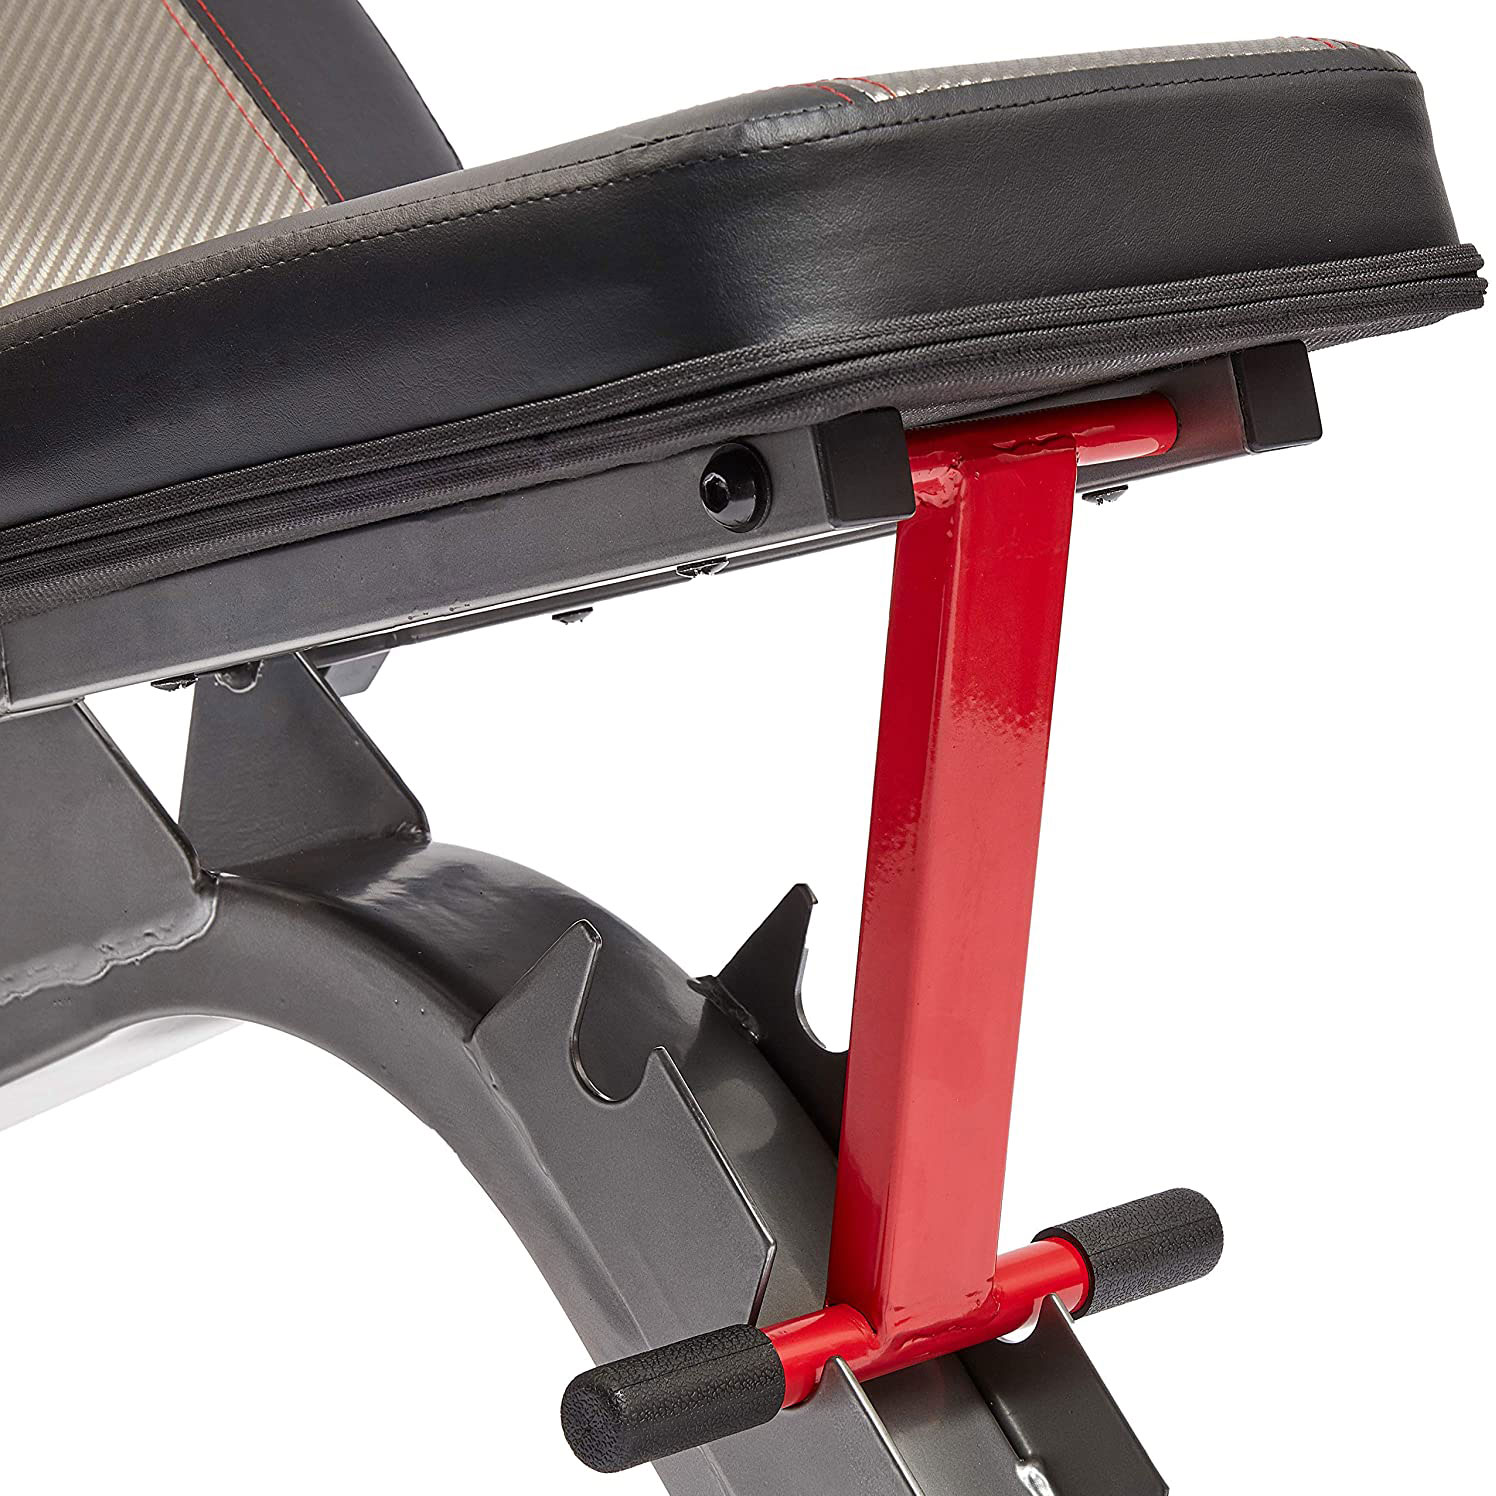 6 Day Reebok Adjustable Workout Bench for Burn Fat fast